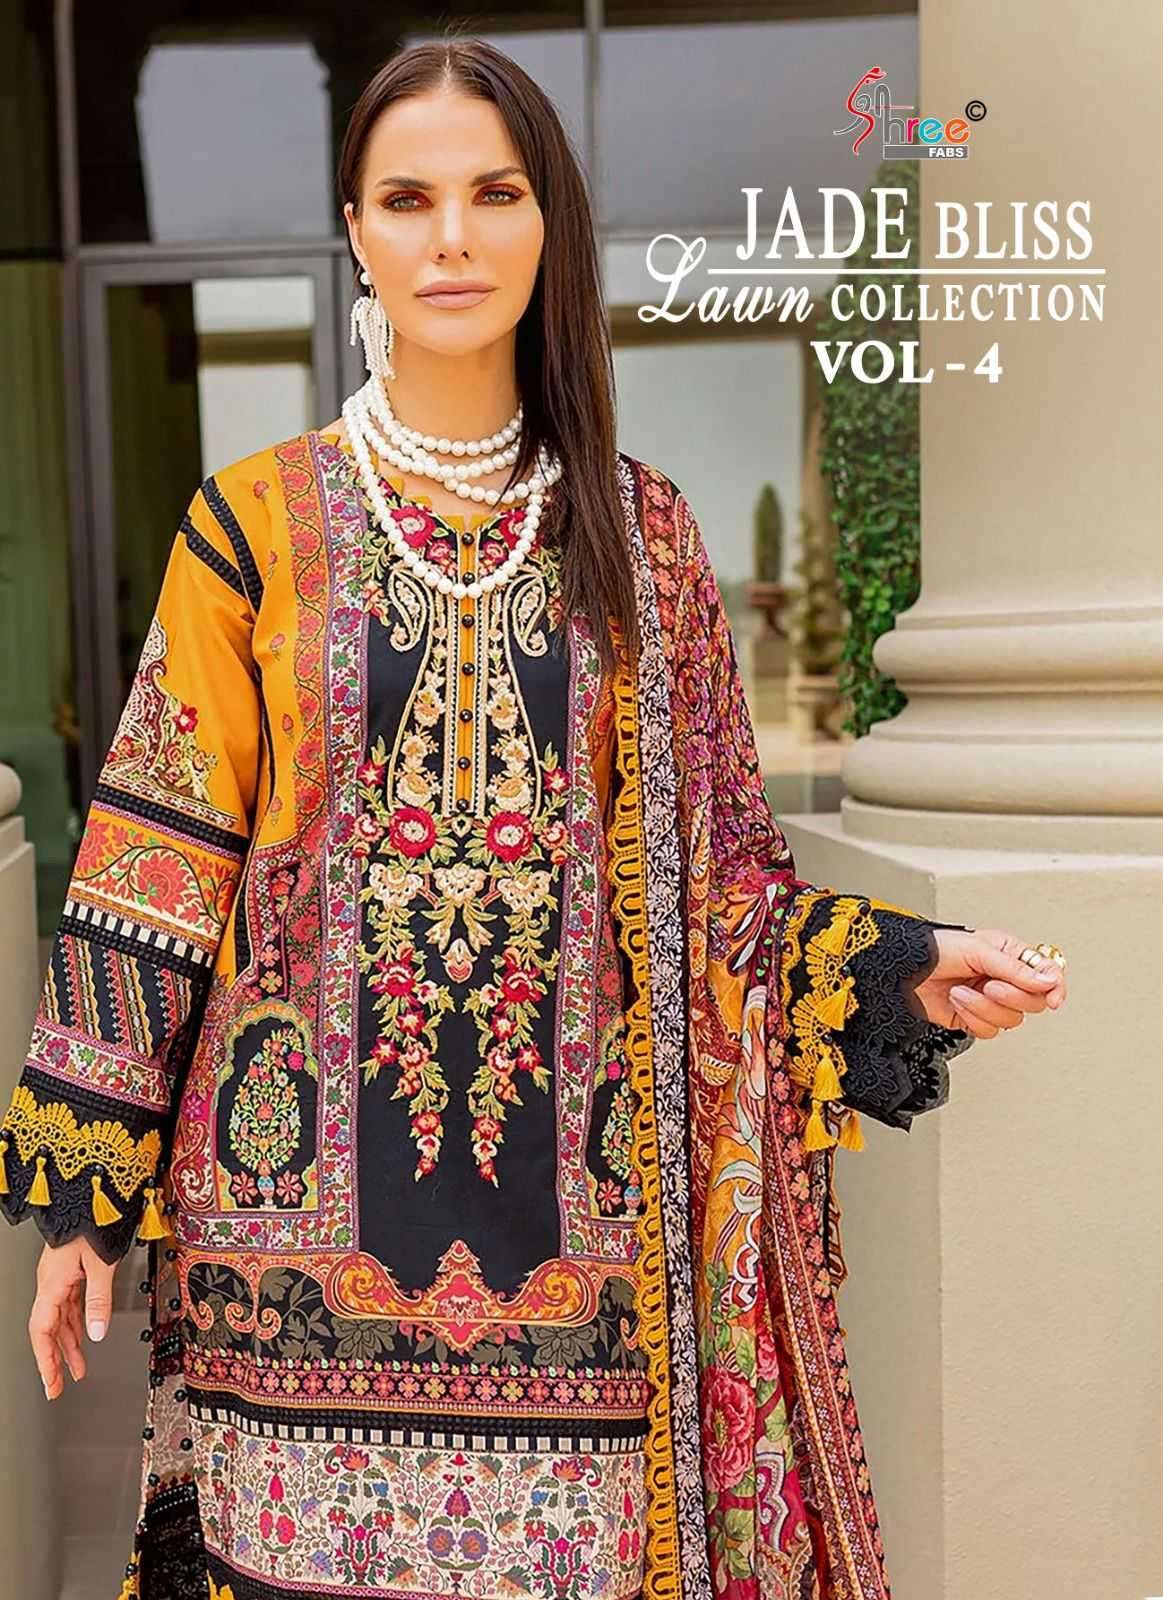 shree fab jade bliss lawn collection vol 4 series 3390-3393 pure cotton suit 